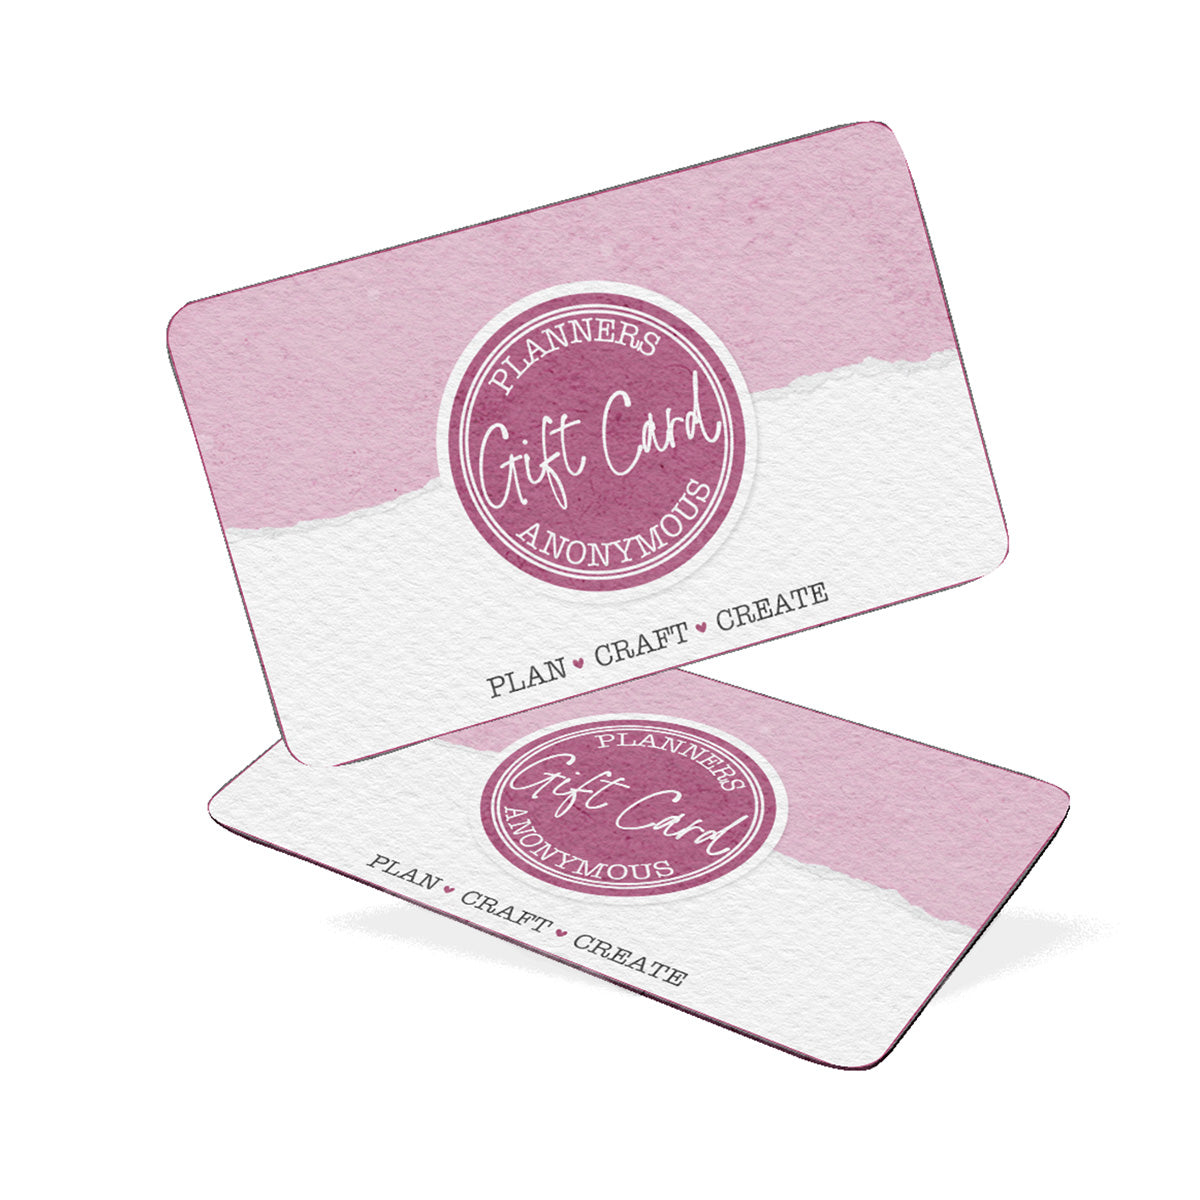 Planners Anonymous Gift Card